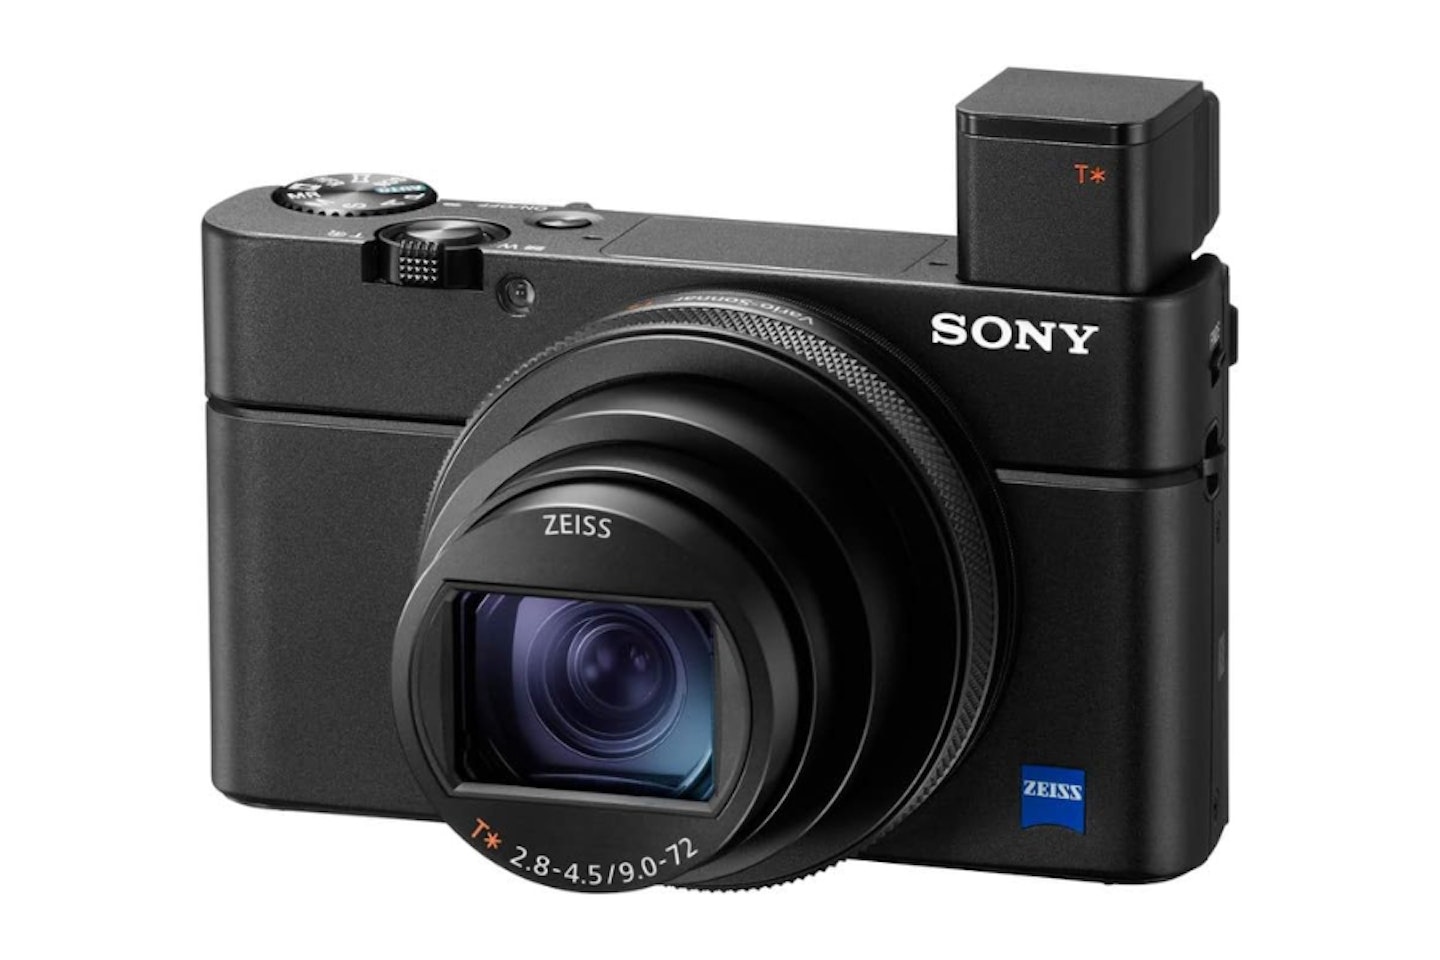 Sony RX100 VII - one of the best point and shoot cameras